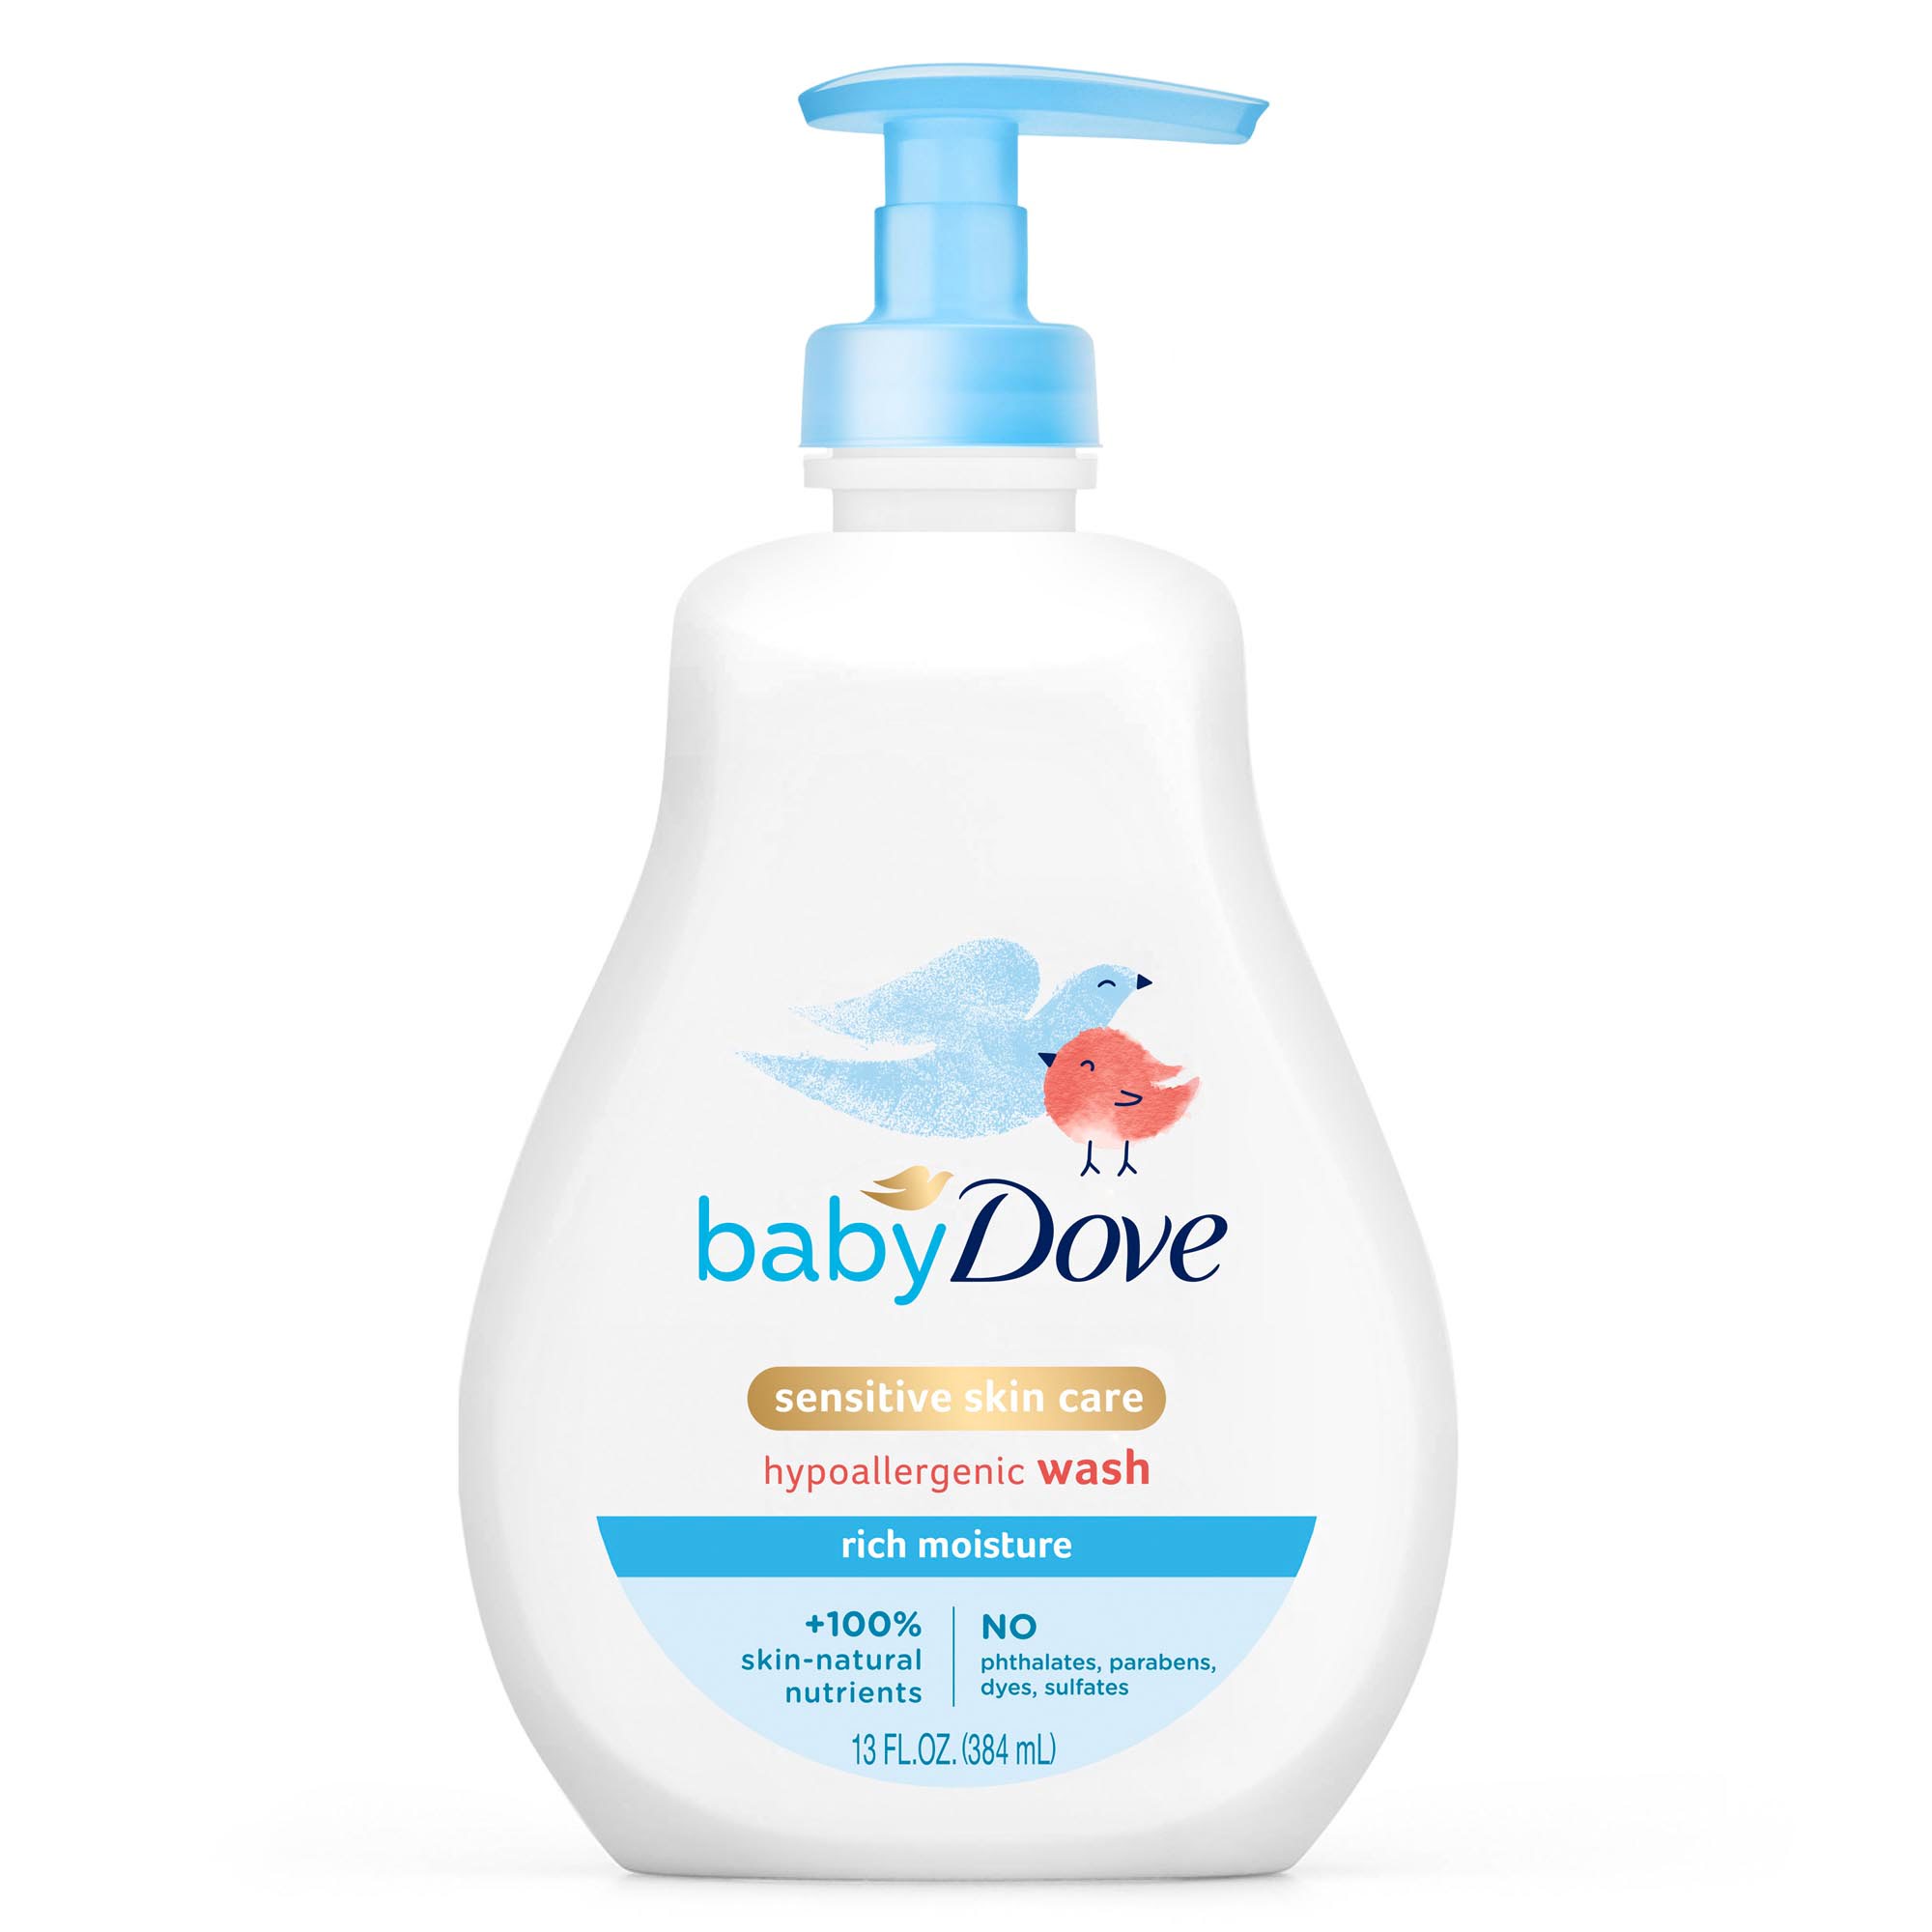 Baby Dove Sensitive Skin Care Liquid Baby Body Wash Rich Moisture, Hypoallergenic and Tear-Free, 13 oz - image 1 of 13